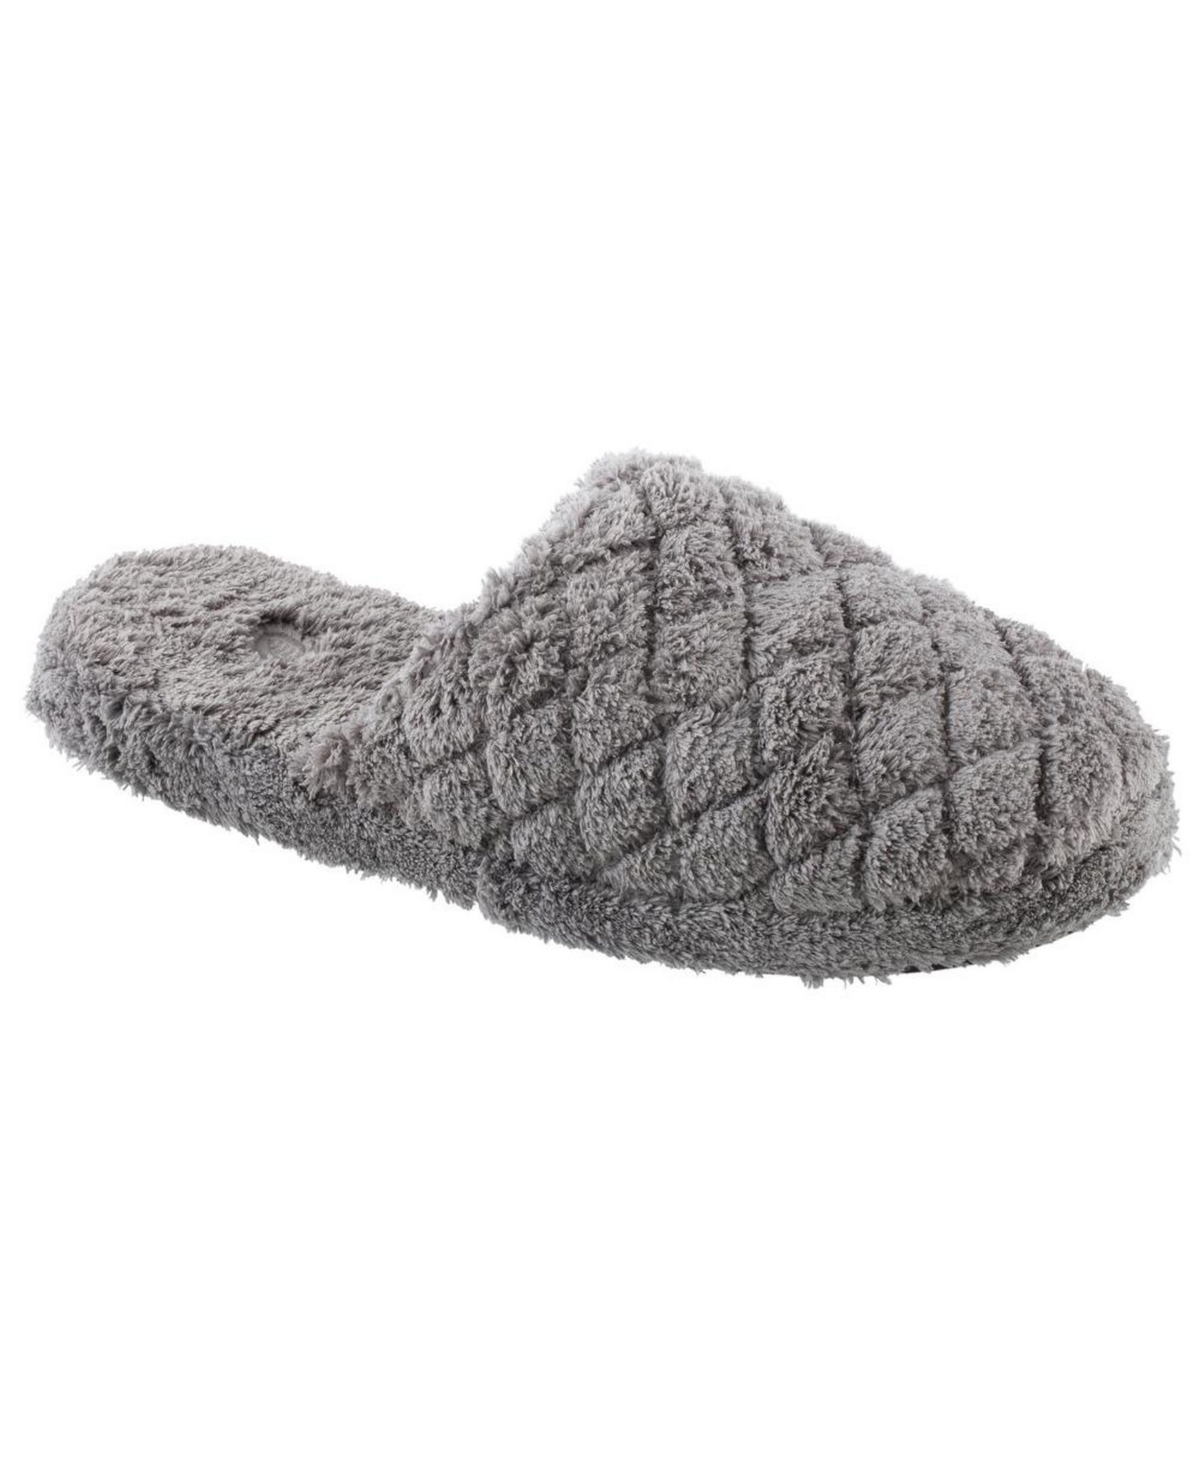 ACORN WOMEN'S SPA QUILTED CLOG SLIPPERS WOMEN'S SHOES